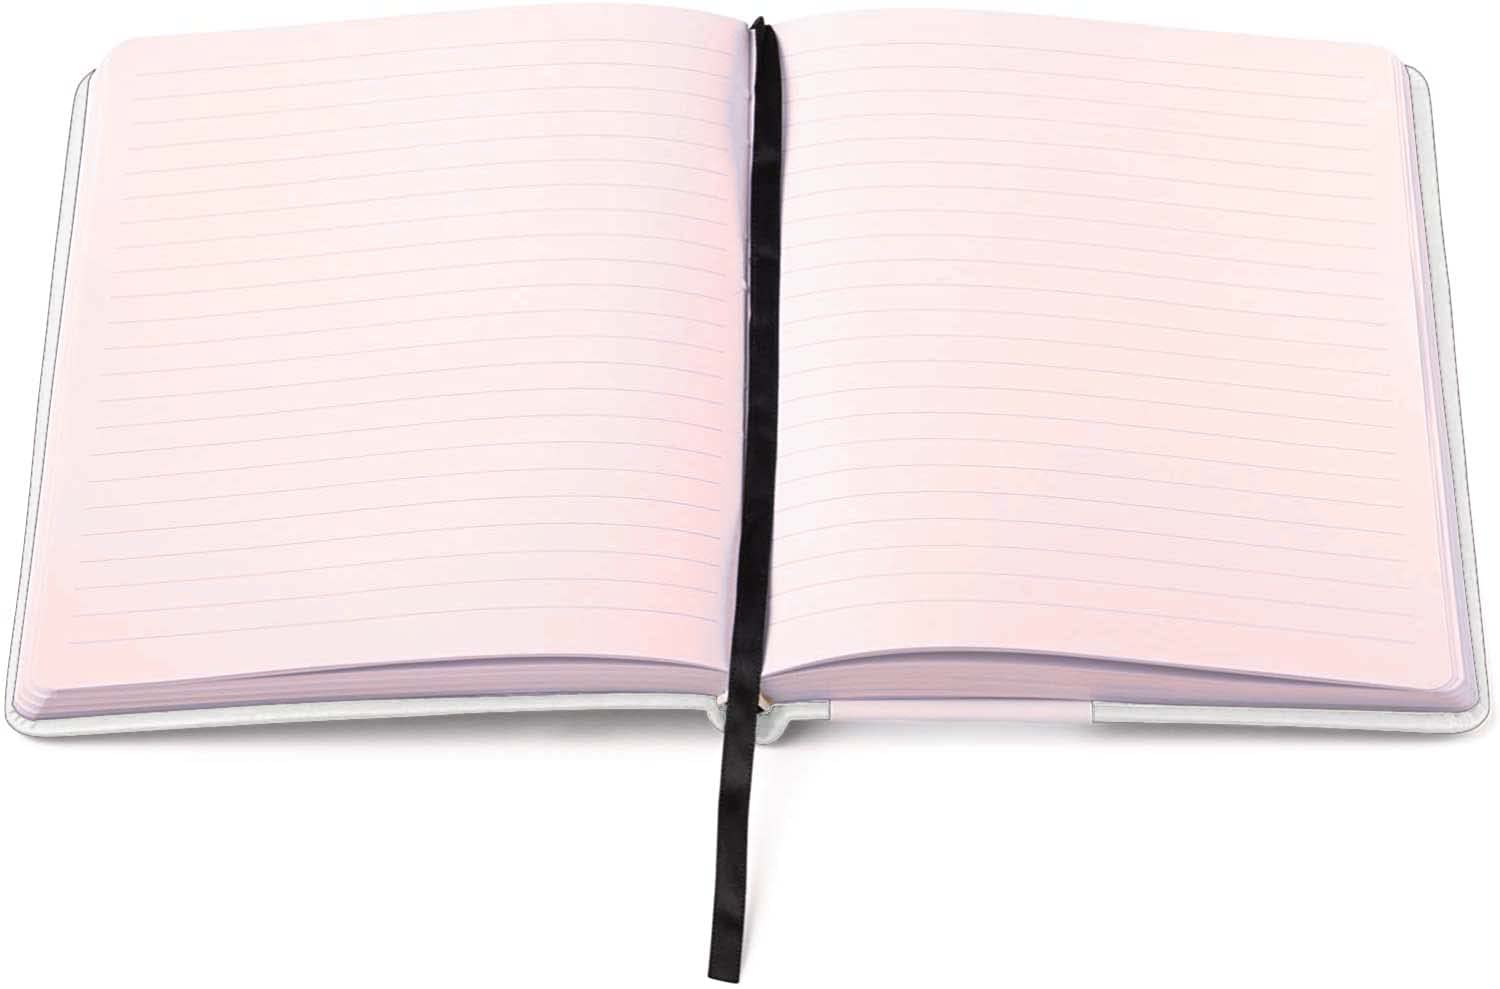 Lay Flat Notebook for Work or School